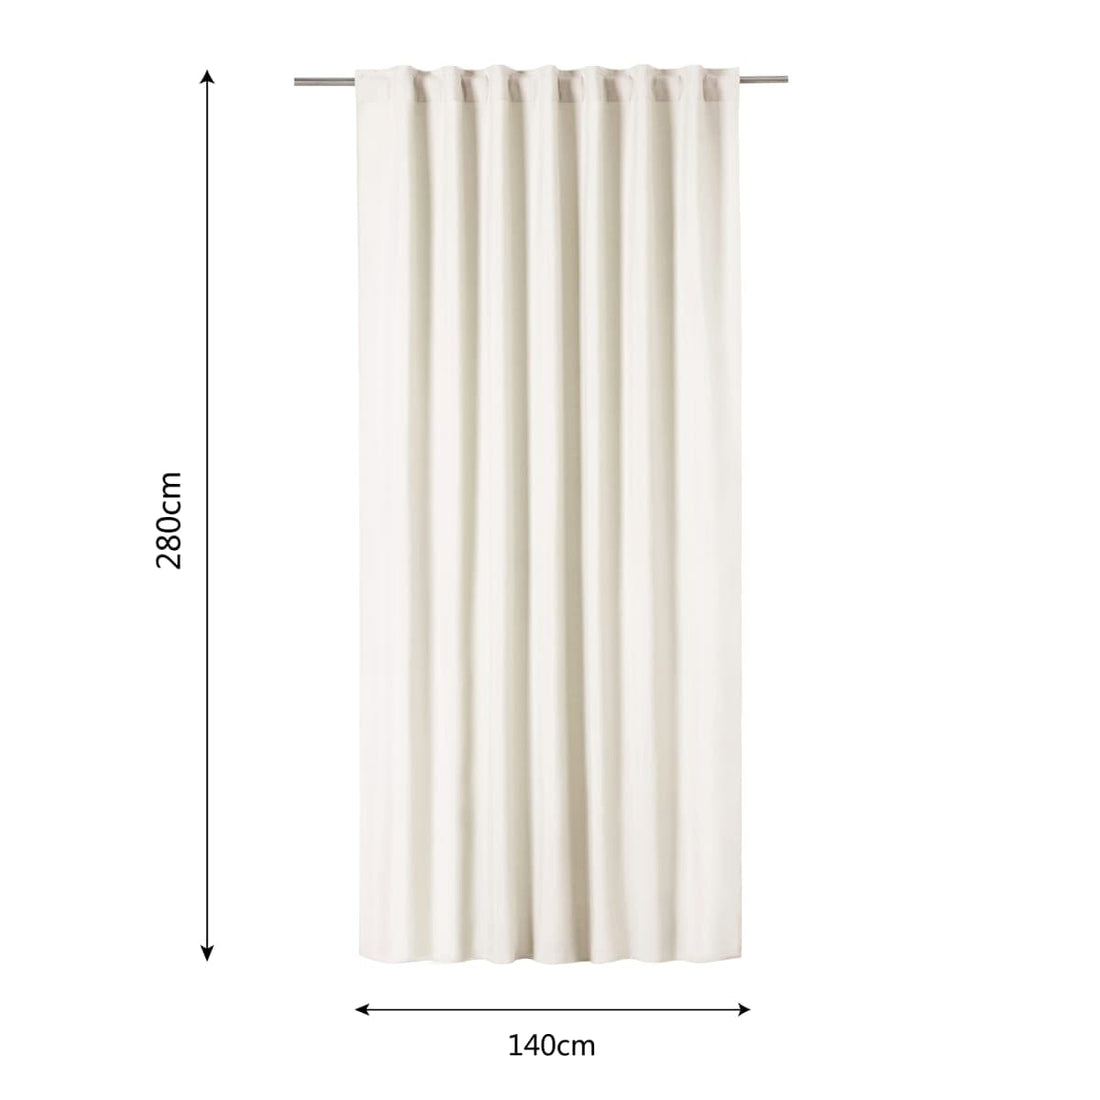 WHITE POLYCOTTON PHARREL OPAQUE CURTAIN 140X280 CM WEBBING AND CONCEALED HANGING LOOP - best price from Maltashopper.com BR480009550